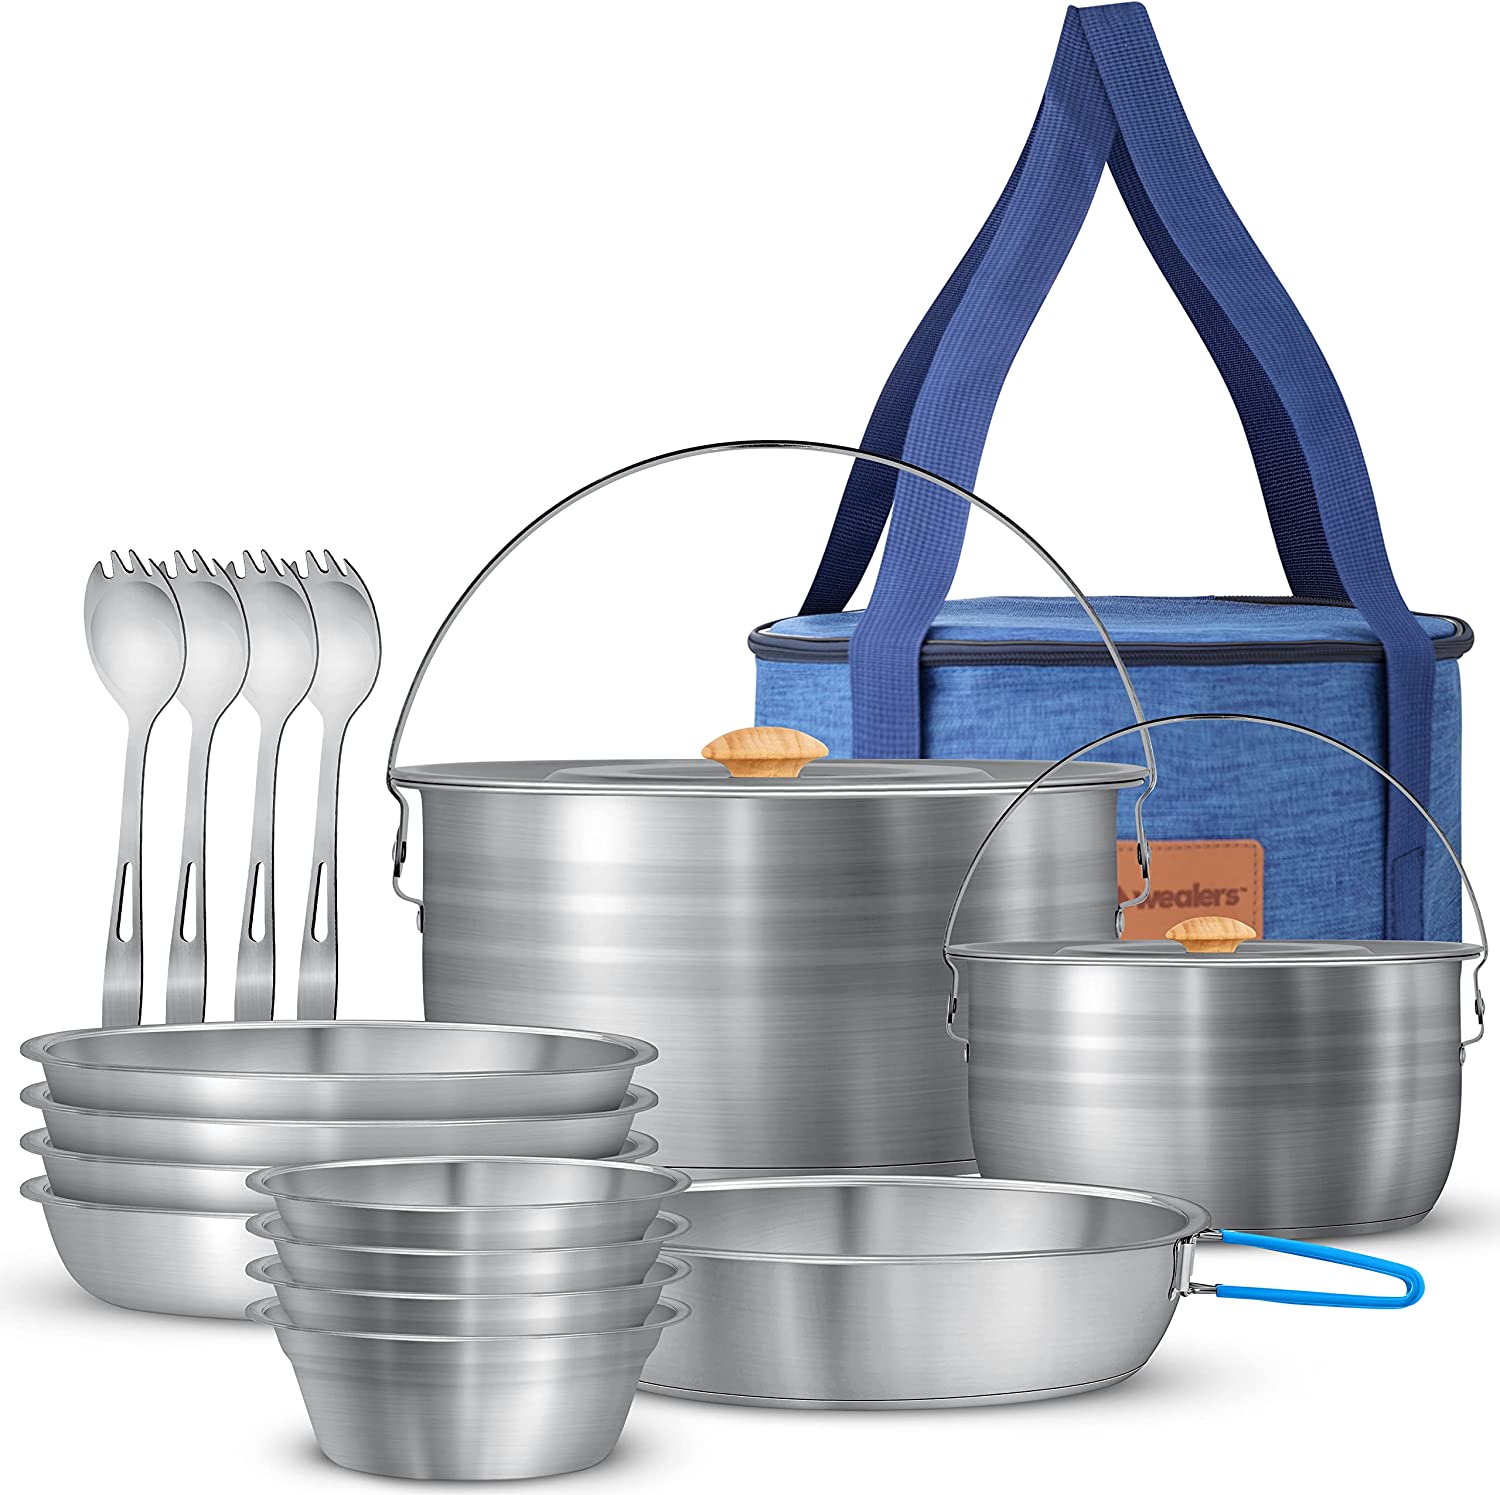 Camping Cookware & Dinnerware Set - 17 Pc Stainless Steel Pots and